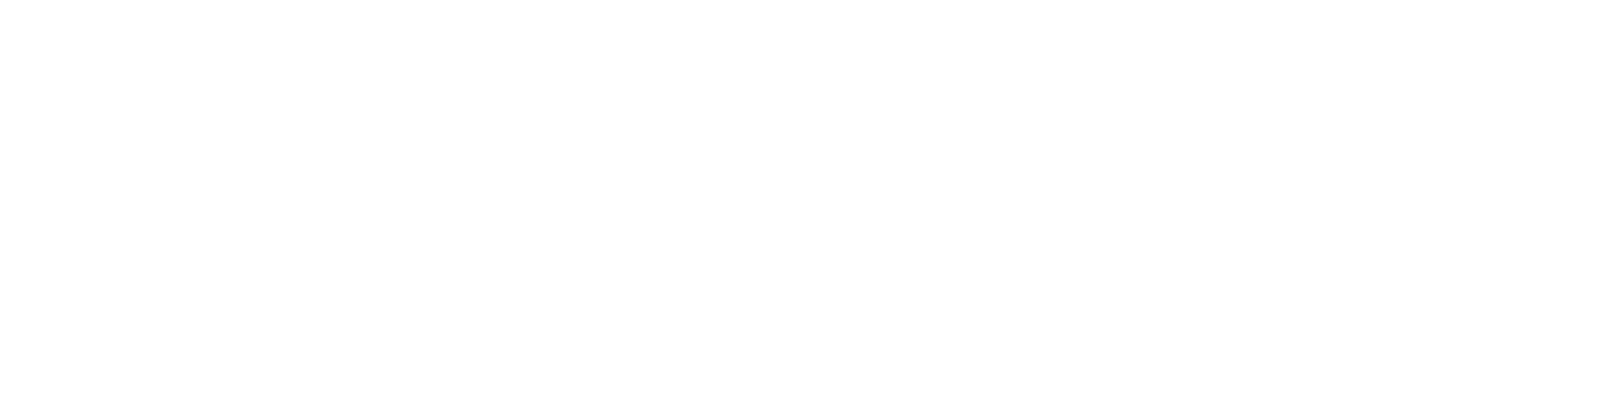 Yamama Saudi Cement Company logo for dark backgrounds (transparent PNG)